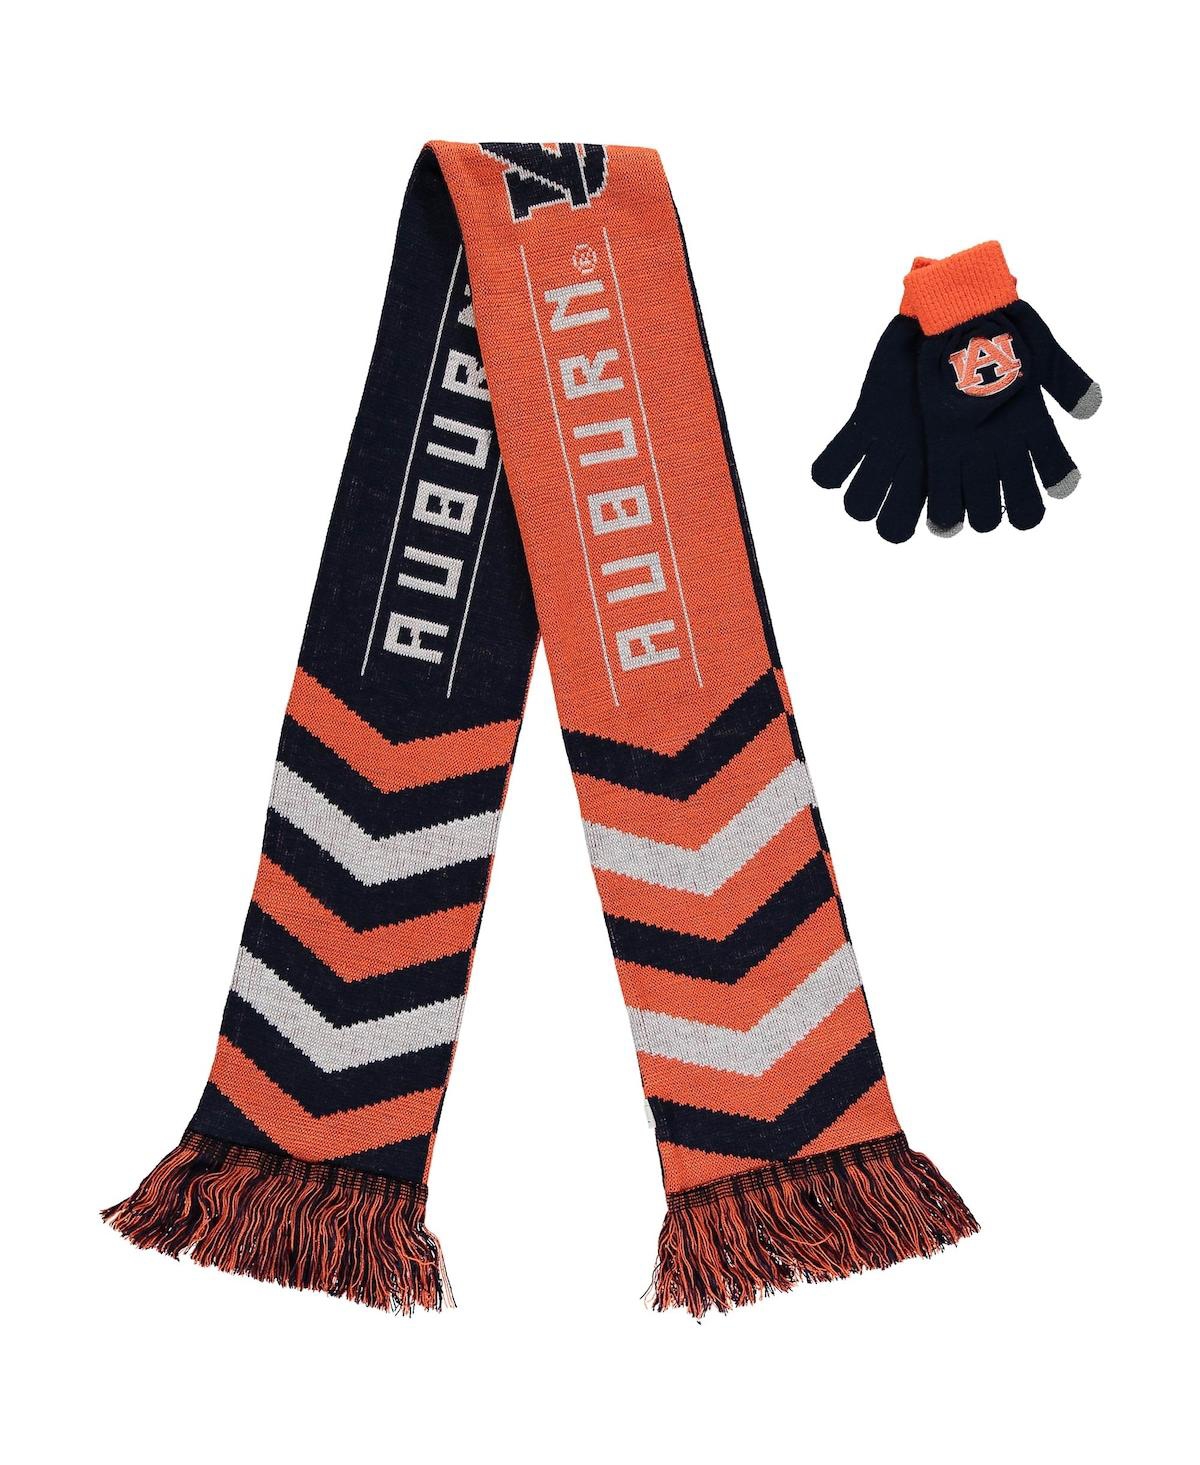 Men's and Women's Foco Navy Auburn Tigers Glove and Scarf Combo Set - Navy